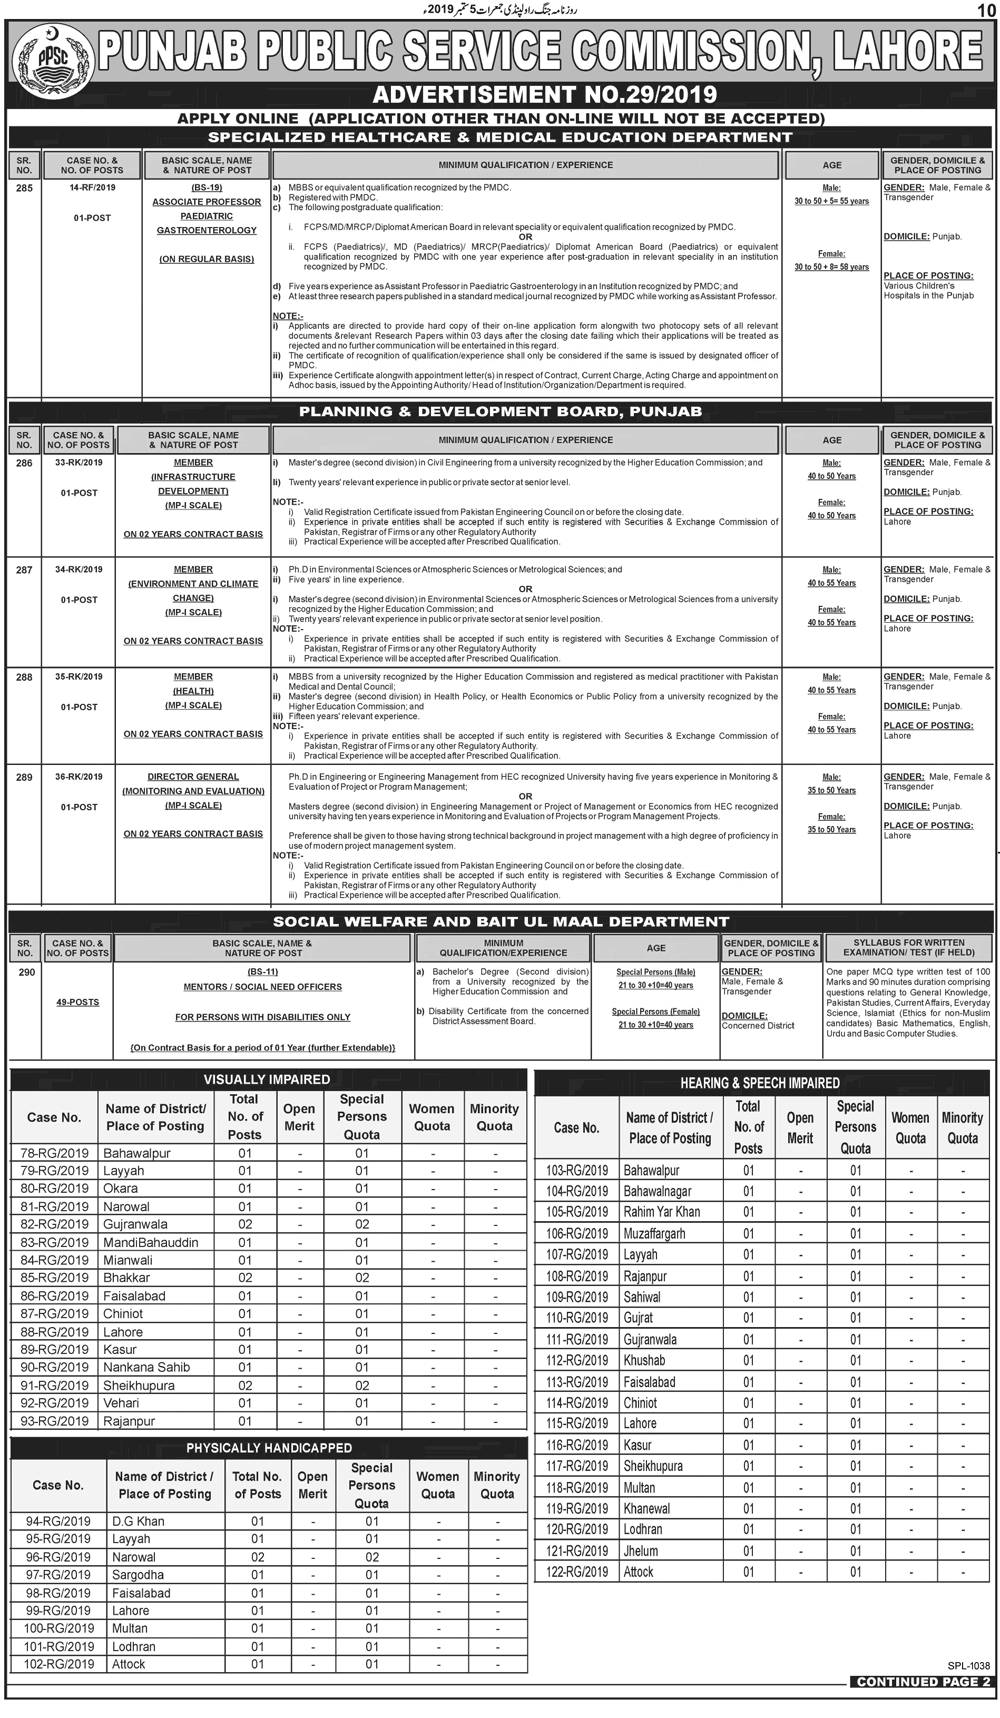 PPSC New Jobs Today Advertisement No 29 2019 Apply Online Filectory